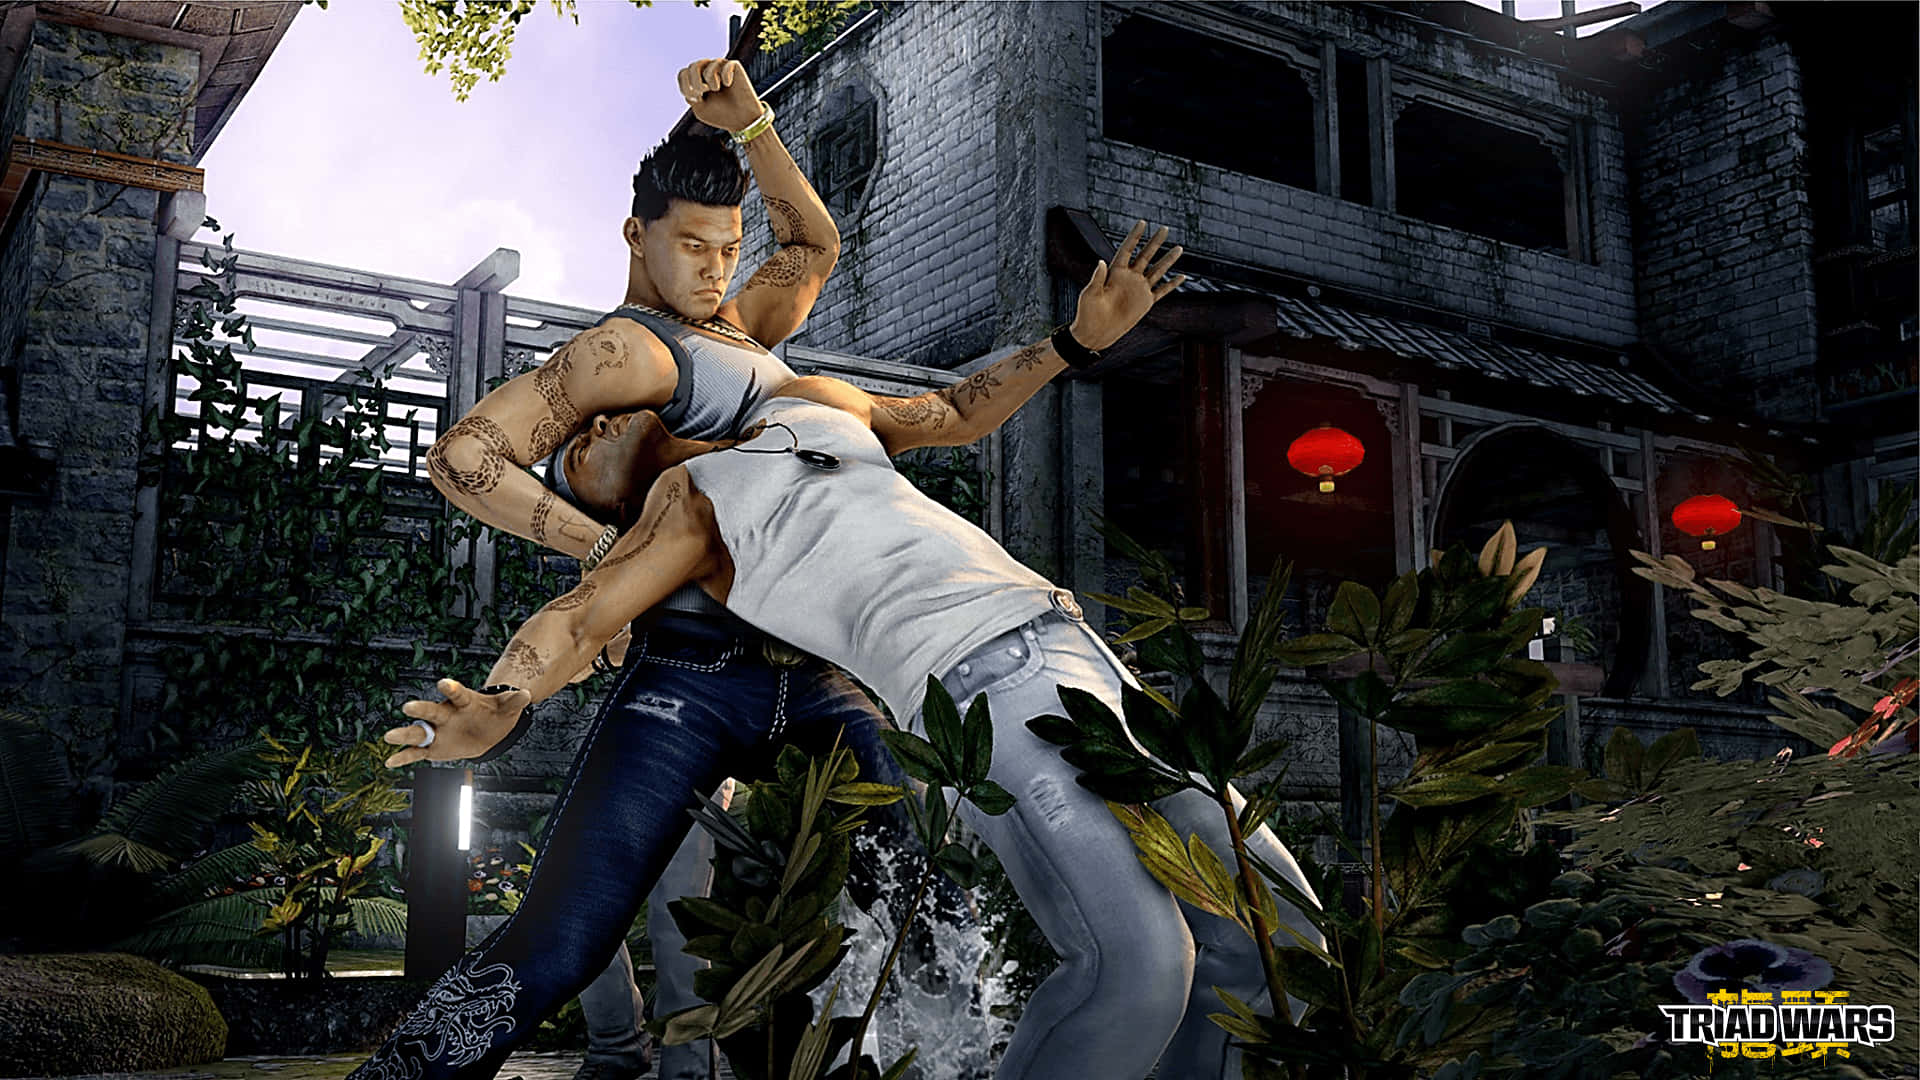 Martial Arts and Action Thriller – Sleeping Dogs